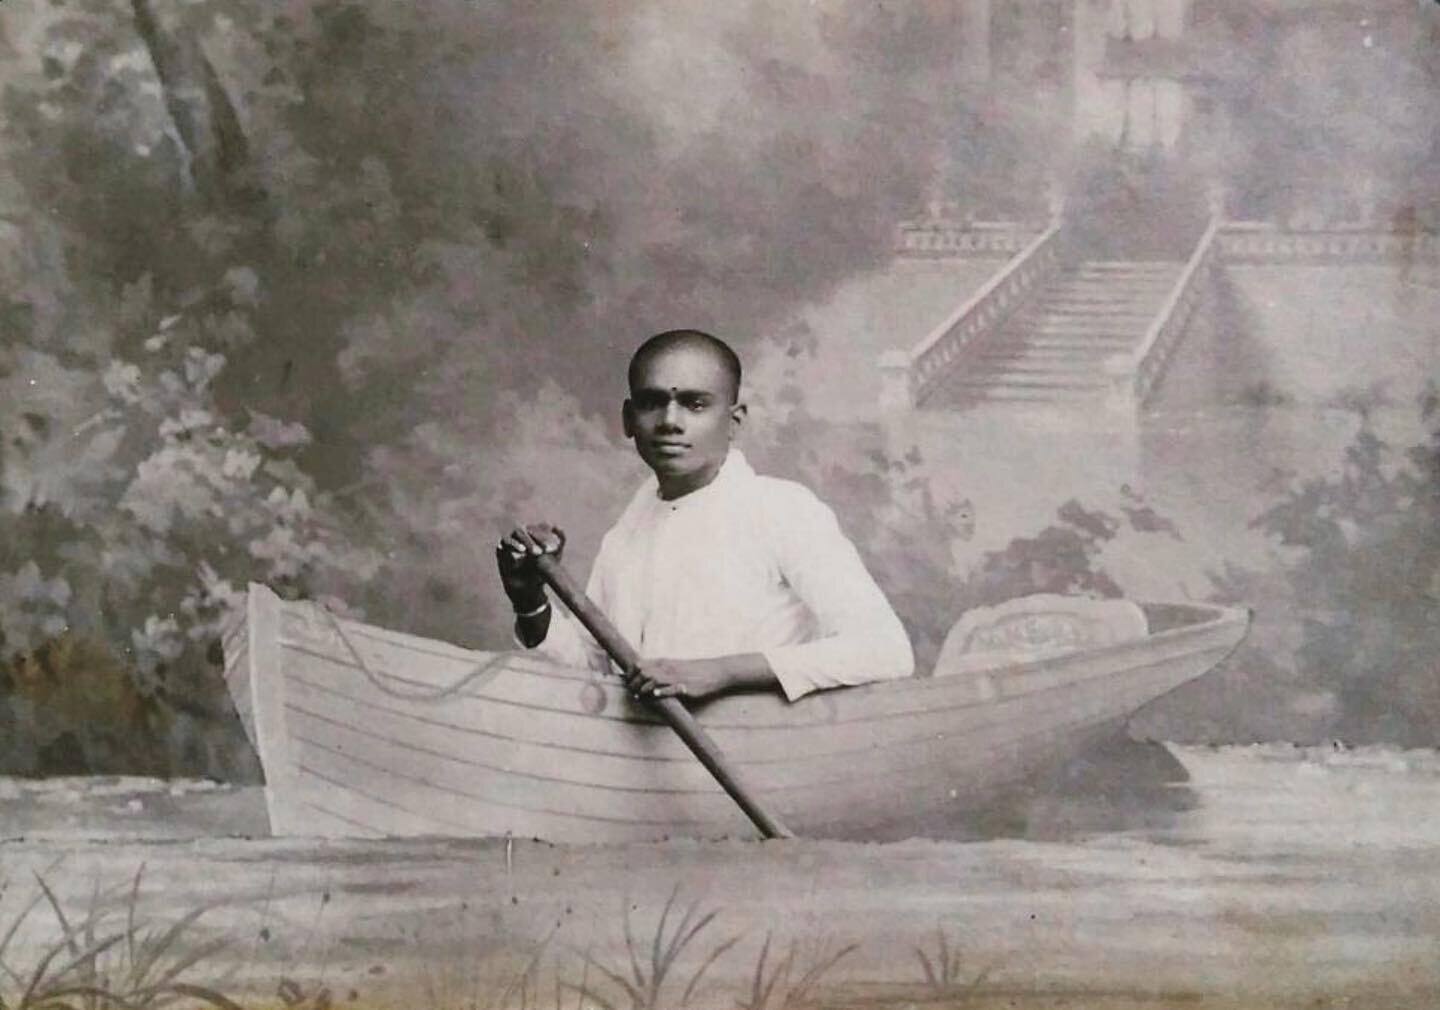 A boy in a row boat. 

🤍 this gem from @starsarchives that showcases Tamil studio photography from 1880 to 1890.

#monsoonmalabar #starsarchives #archive #studiophotography #studioportrait #studiobackdrop #portrait #vintagephotography #vintageindia 